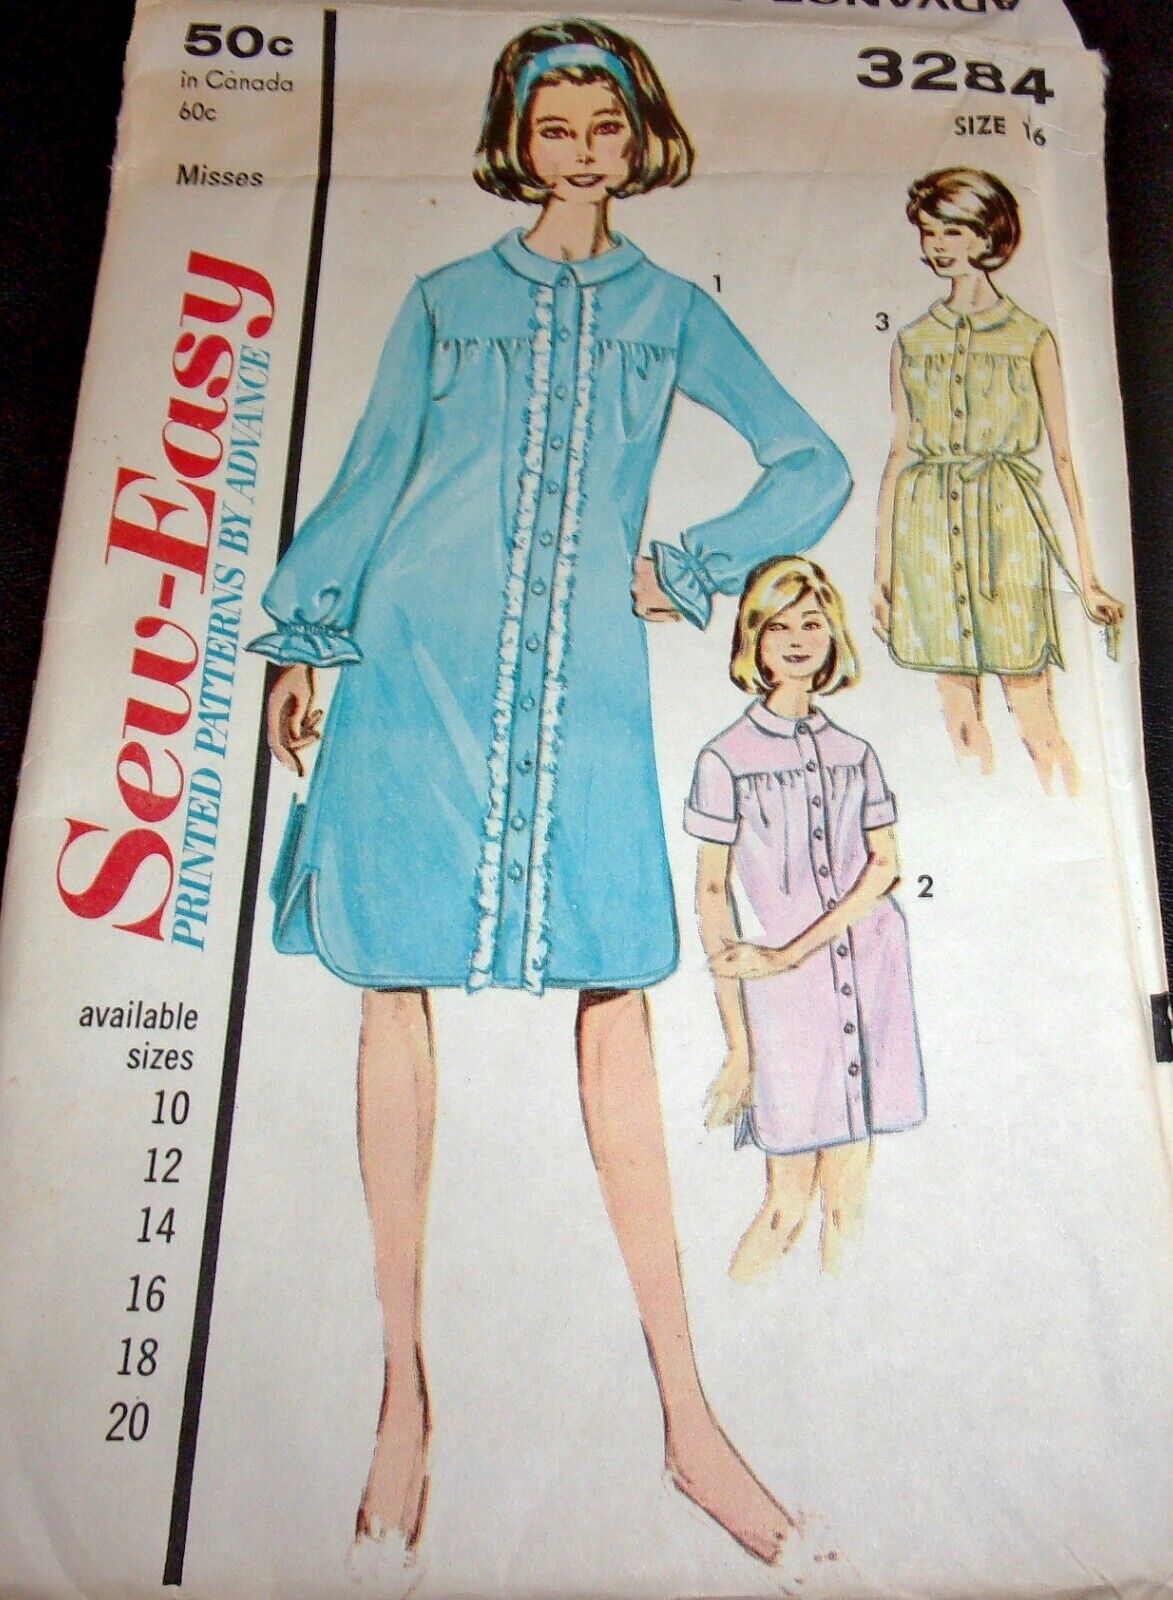 Vtg 1960's Advance Pattern 3284 Buttoned Nightgown or Smock Dress Size 16 Uncut